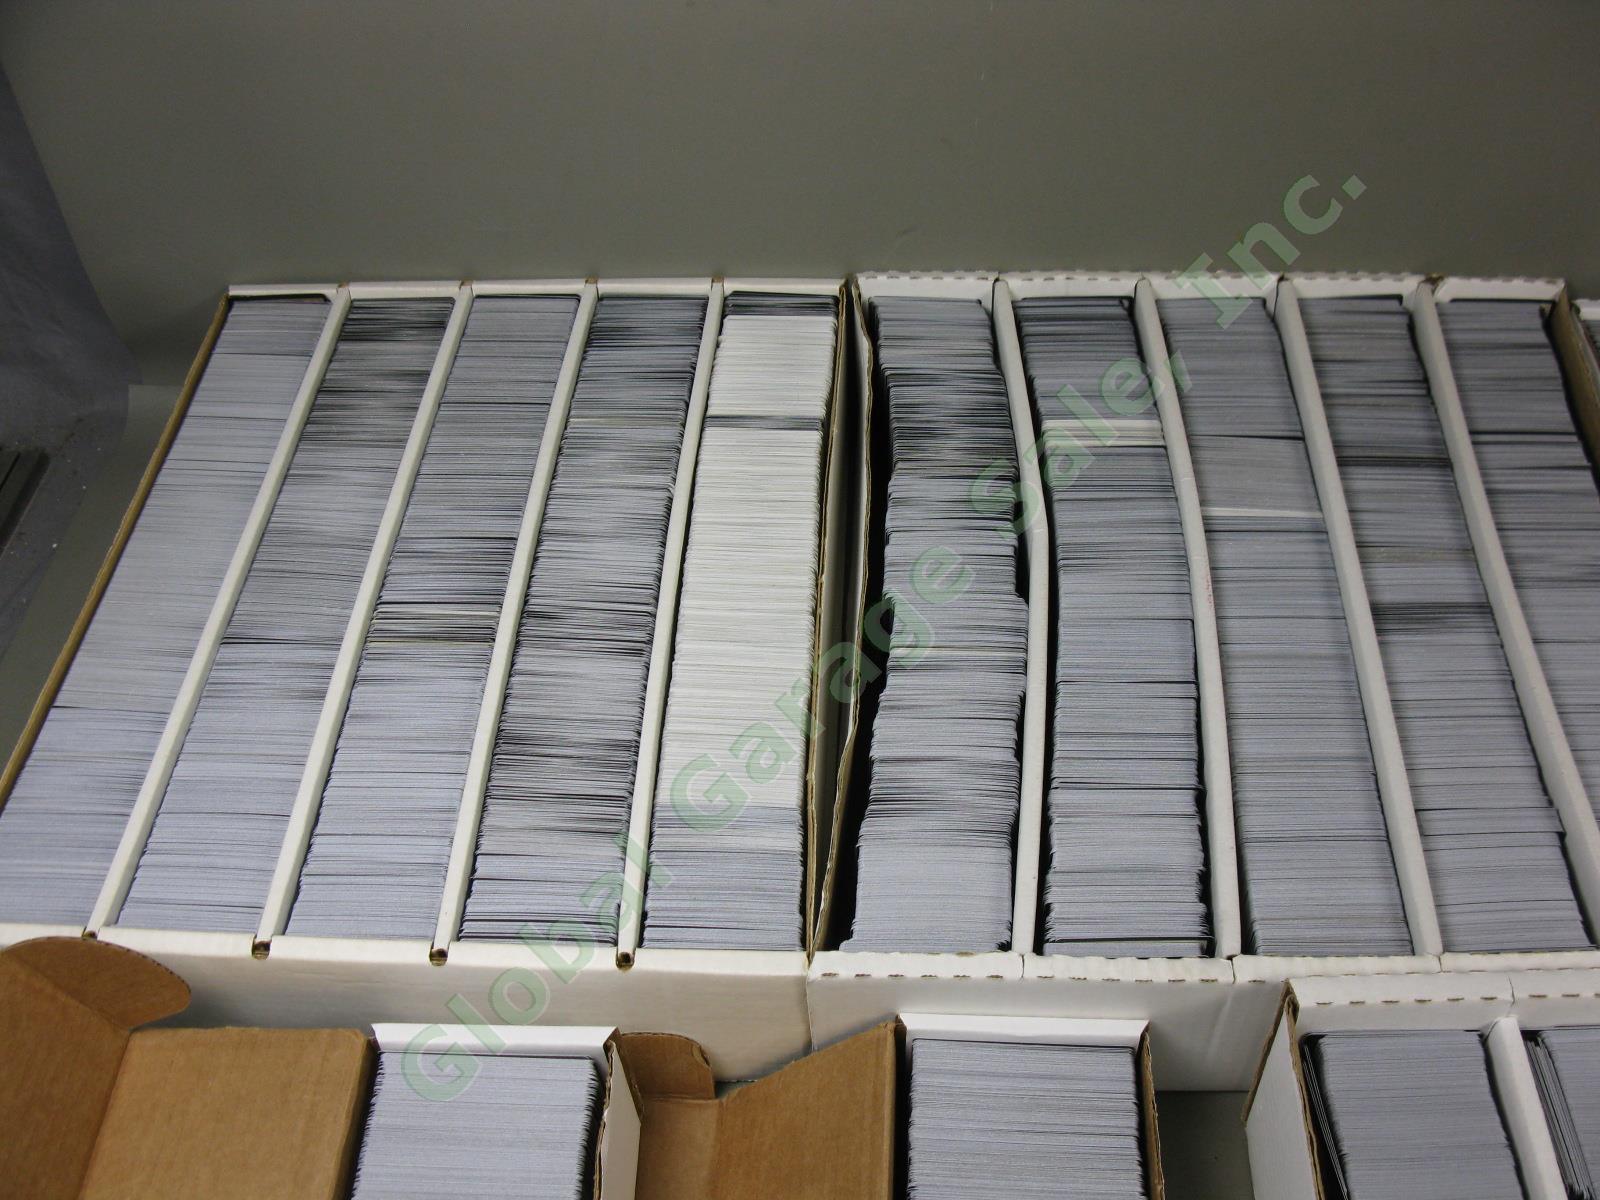 HUGE LOT ~22,000 Magic The Gathering MTG Cards Collection BIGGEST ON EBAY? Rare? 4